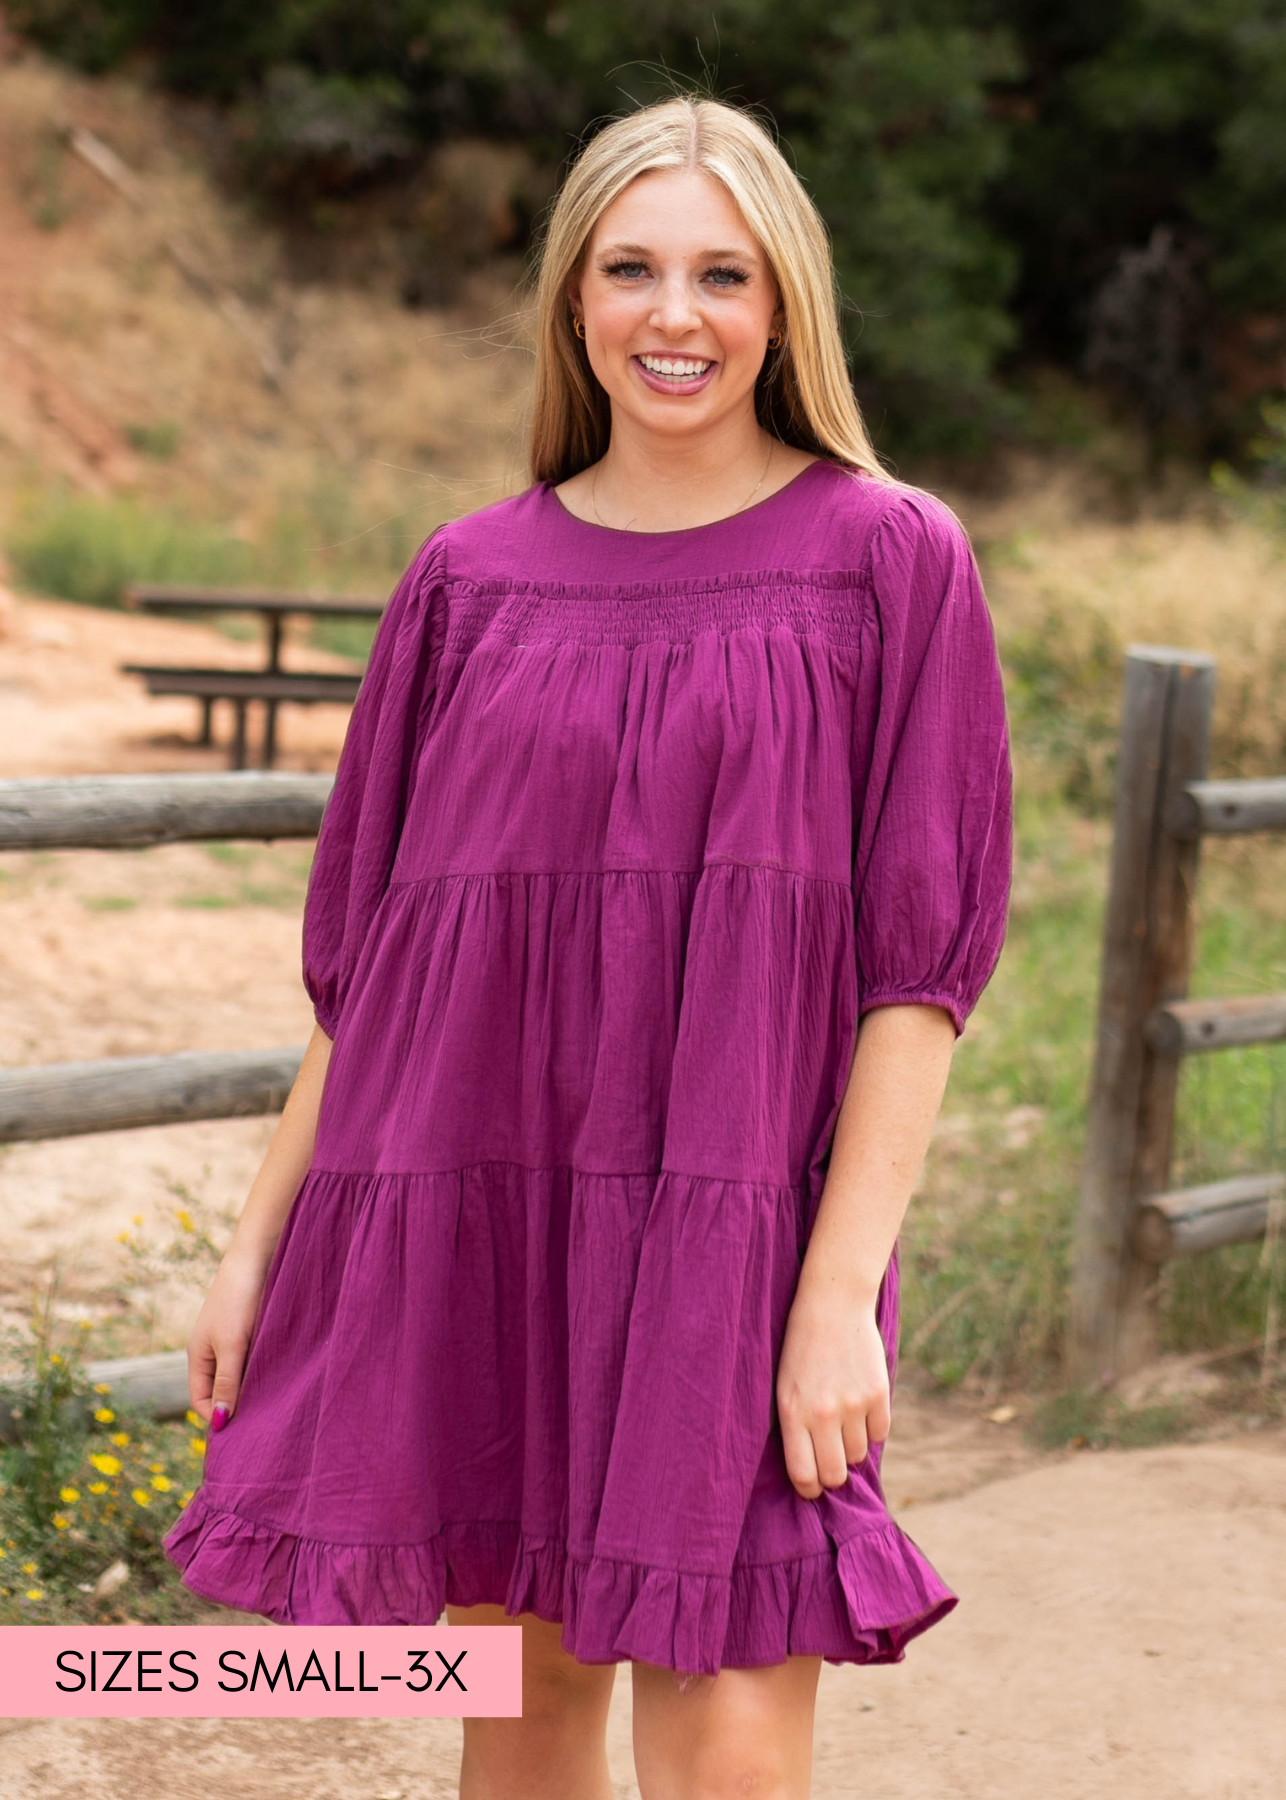 Short sleeve berry dress with a tiered gathered style